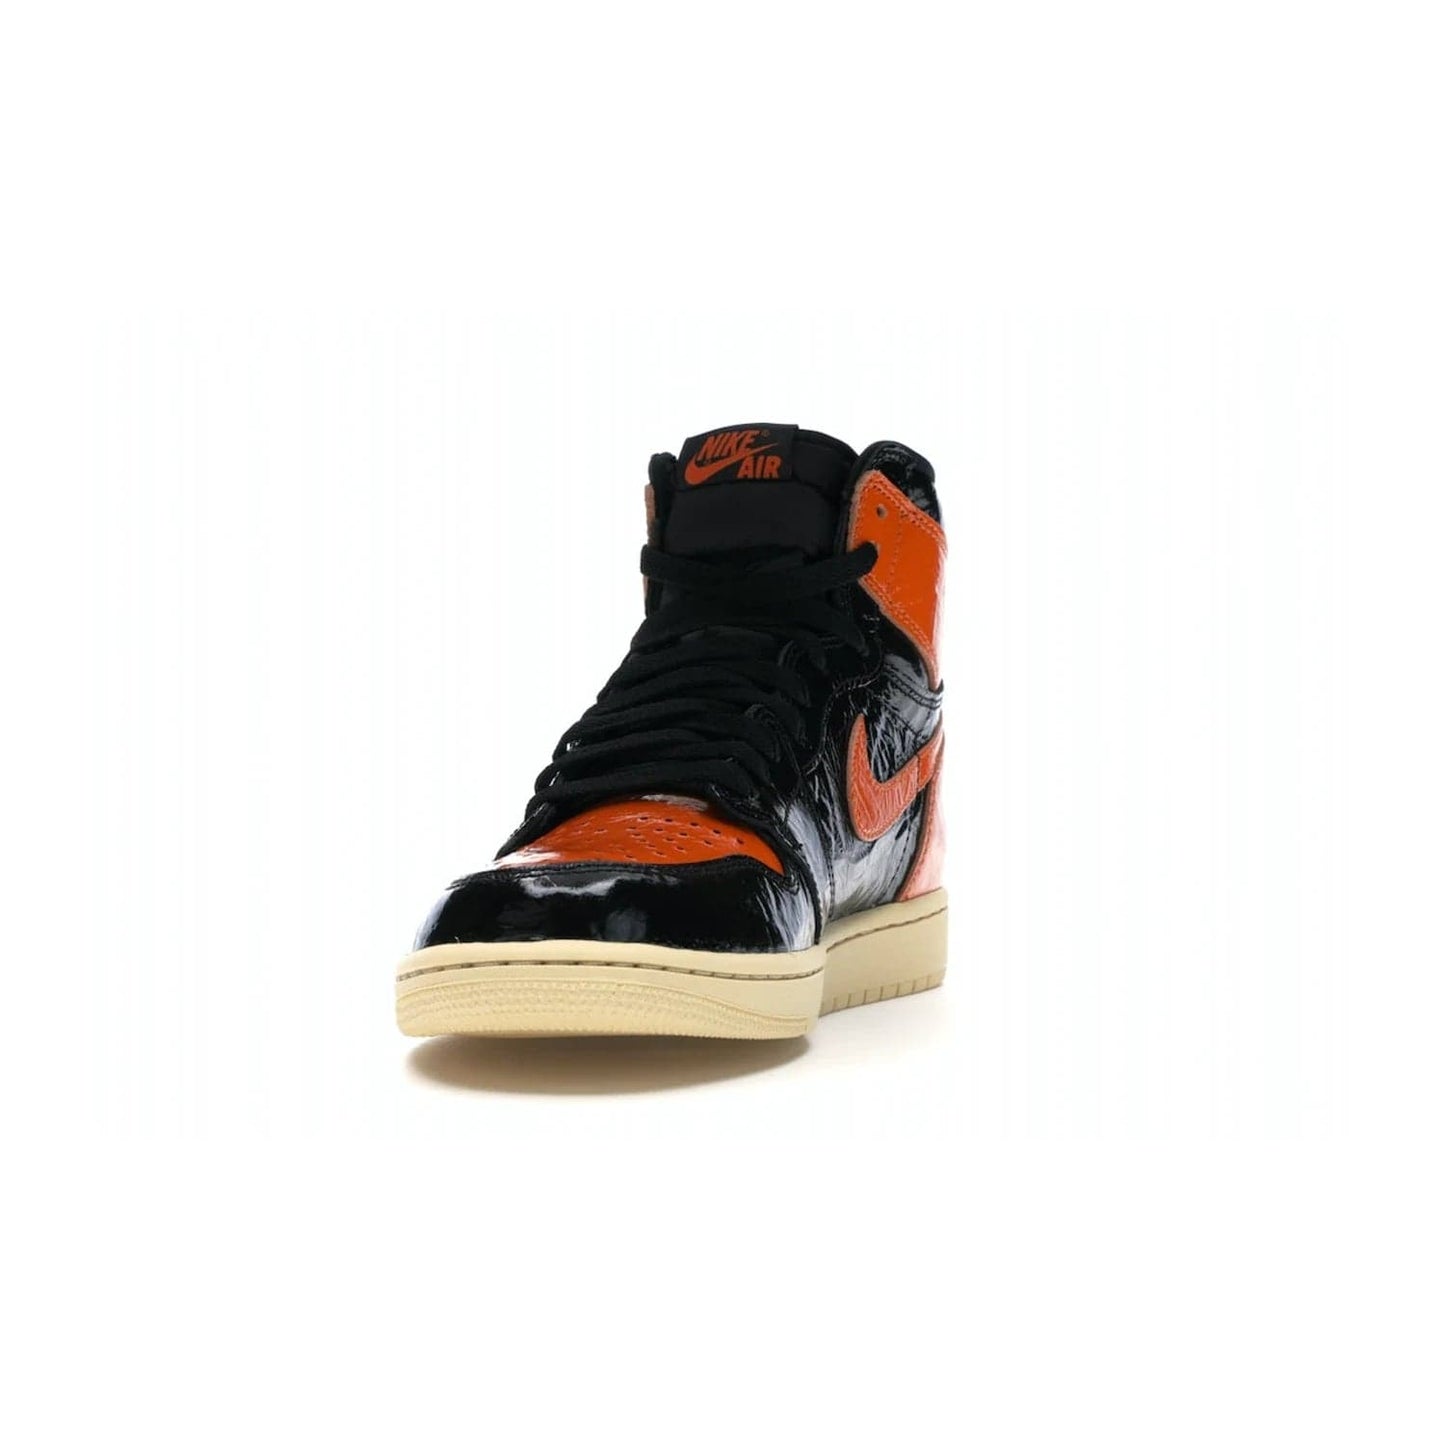 Jordan 1 Retro High Shattered Backboard 3.0 - Image 12 - Only at www.BallersClubKickz.com - #
Jordan 1 Retro High Shattered Backboard 3.0: the perfect blend of modern style and nostalgic flair featuring an orange and black crinkled patent leather upper and yellowed vanilla outsole. Get these exclusive sneakers released in October of 2019!